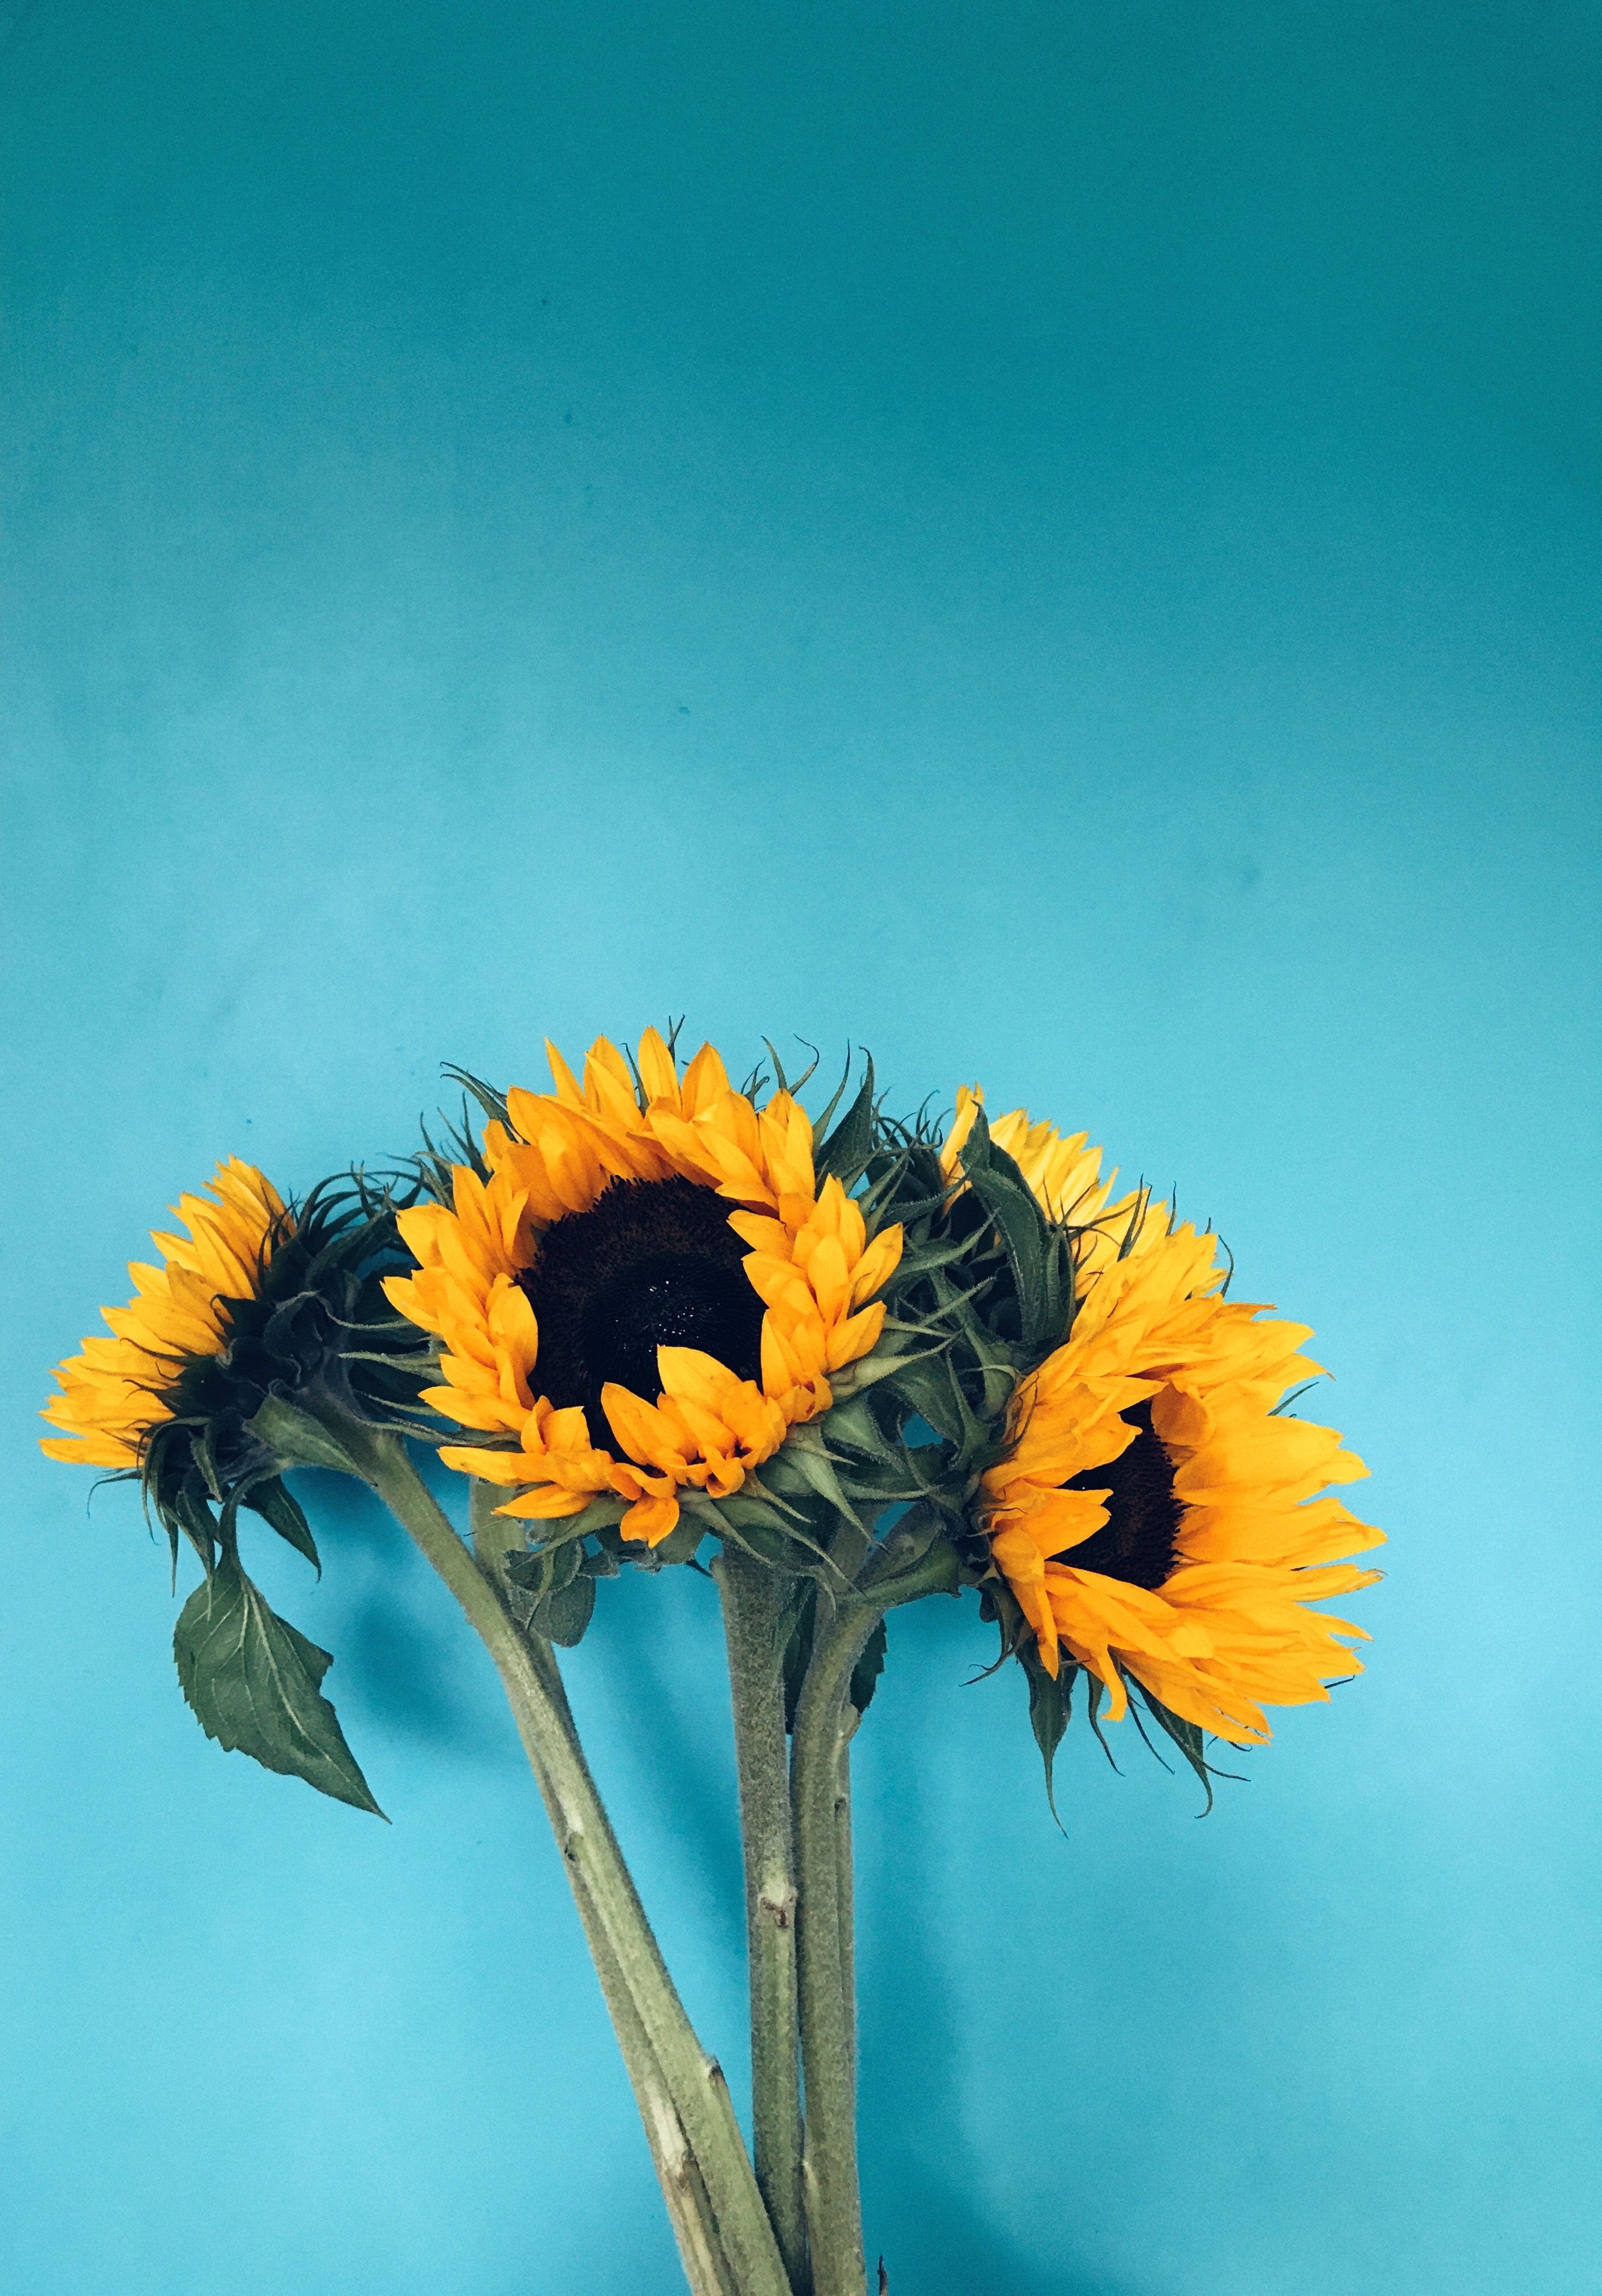 A picture of three yellow sunflowers against a blue background - Sunflower